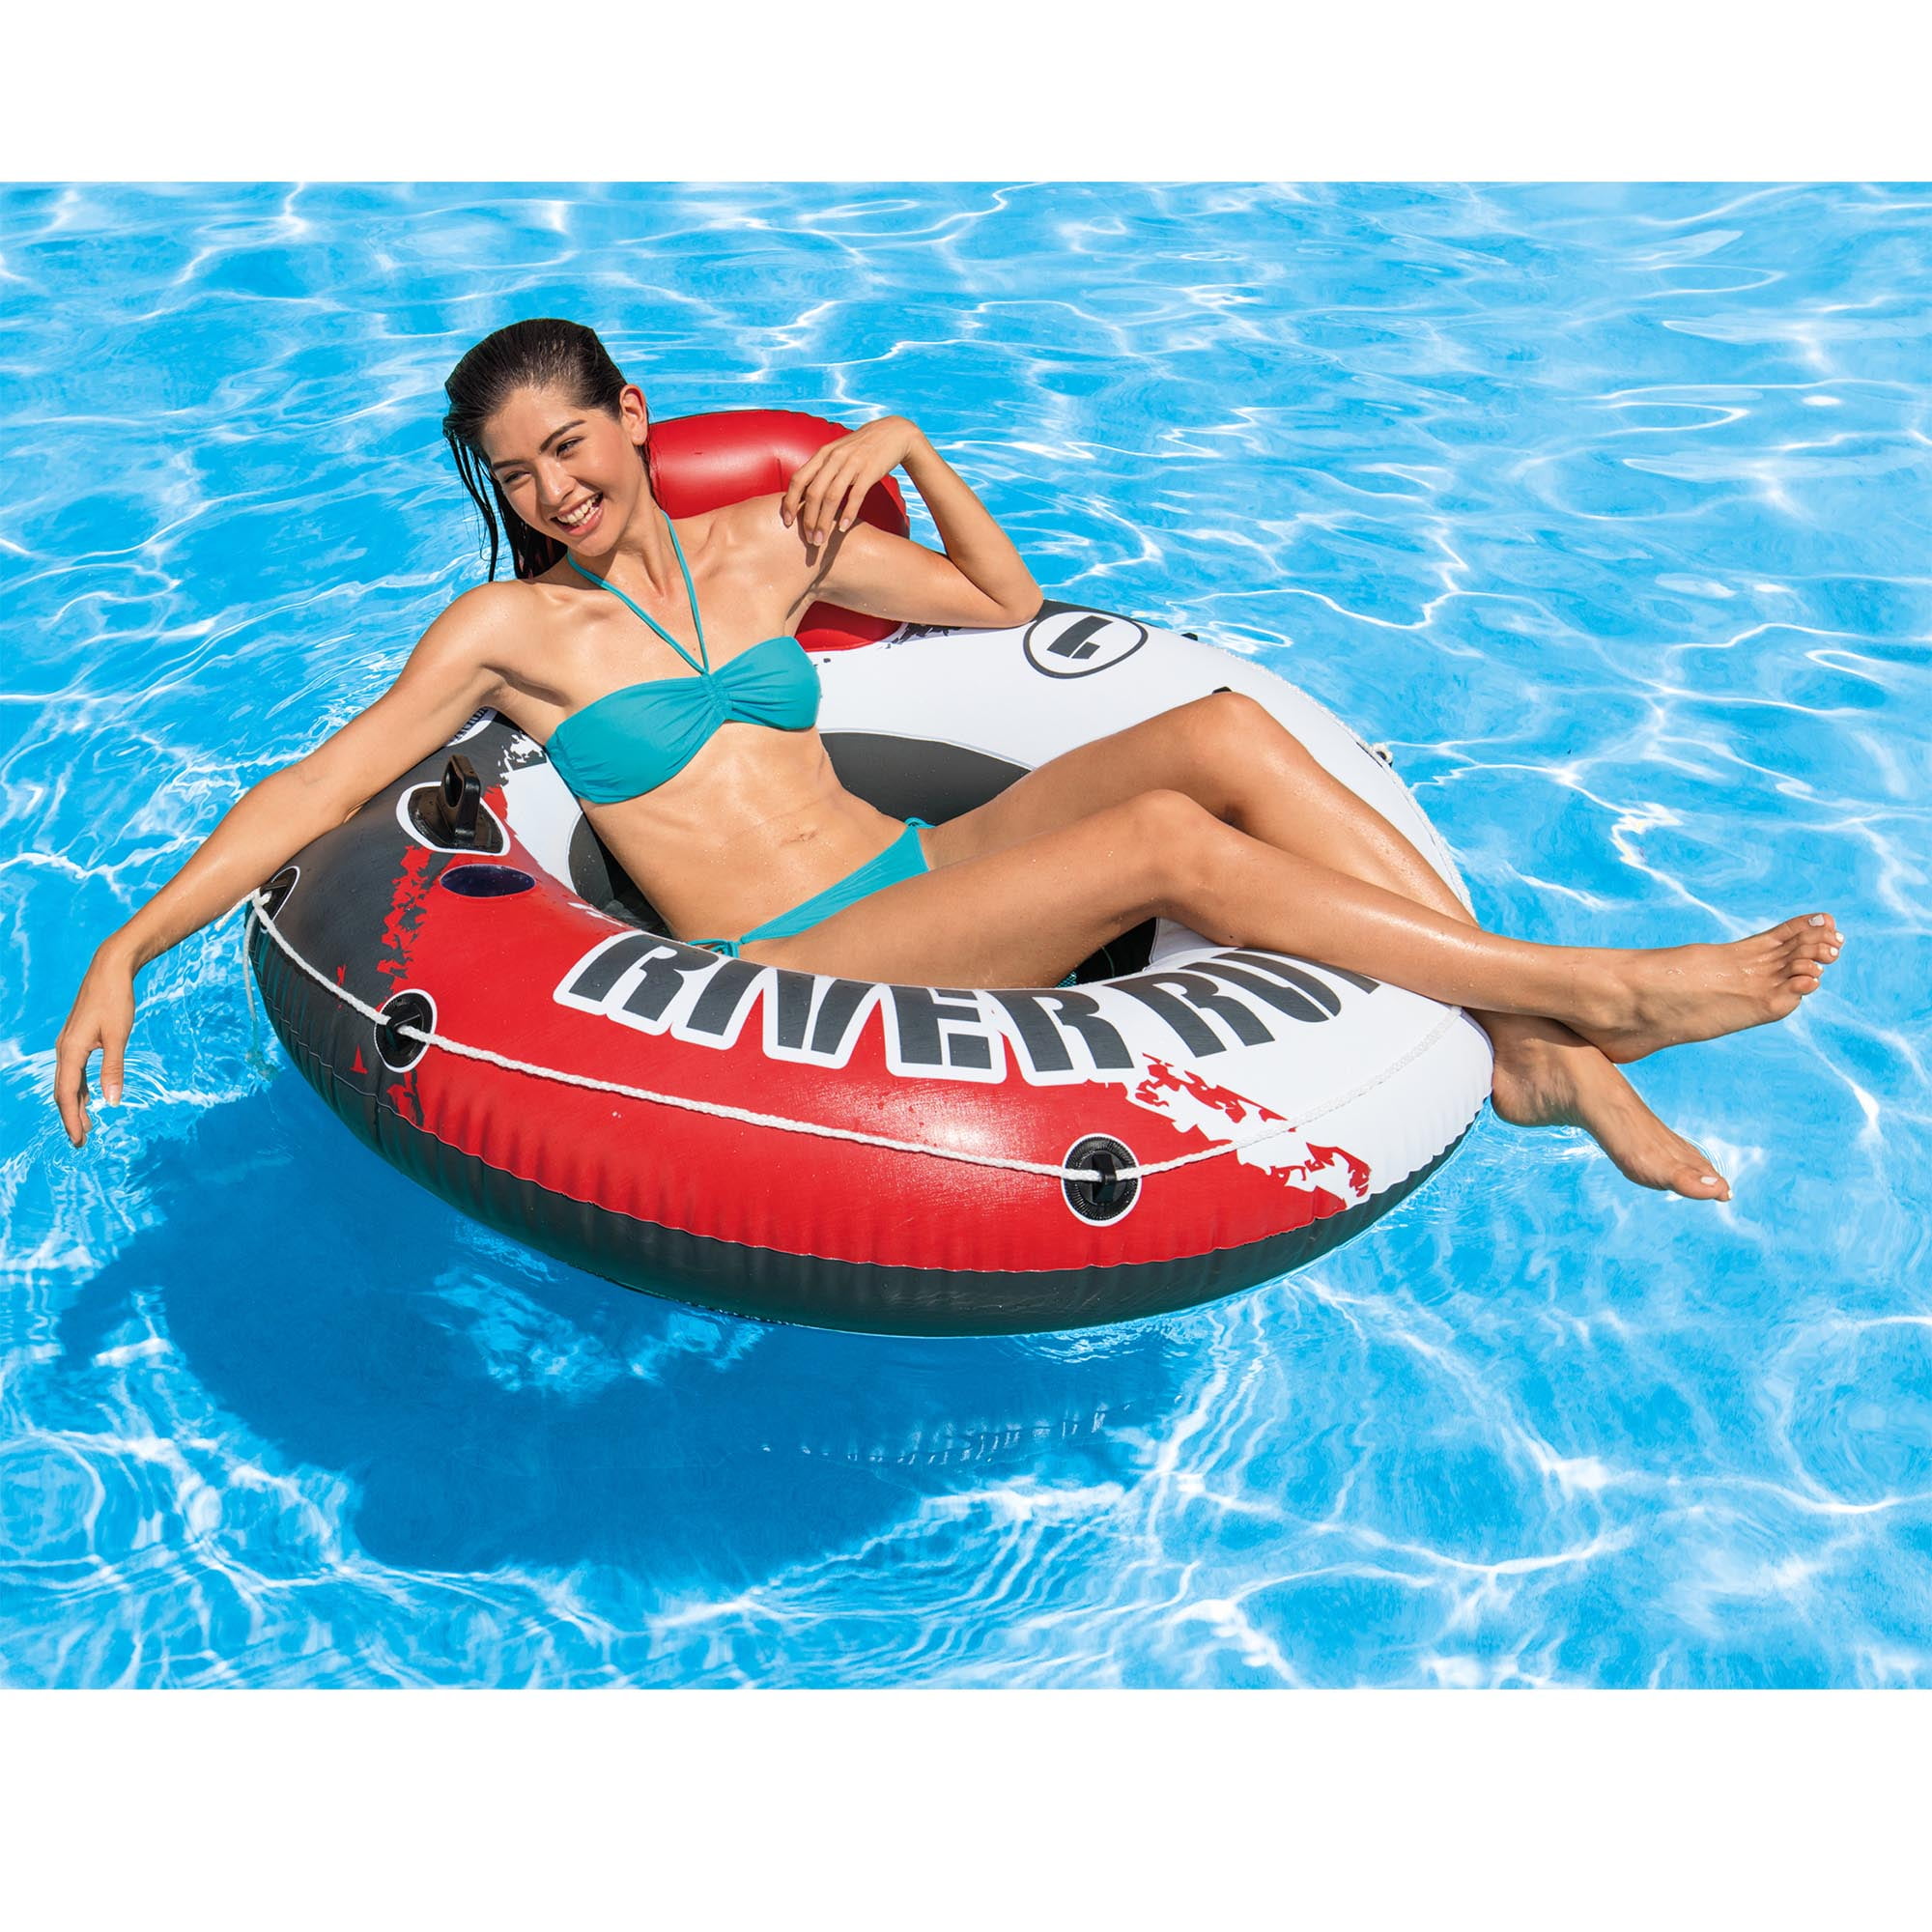 Intex River Run I Red Fire Edition Inflatable Water Tube Lake River Pool 12 Pack 